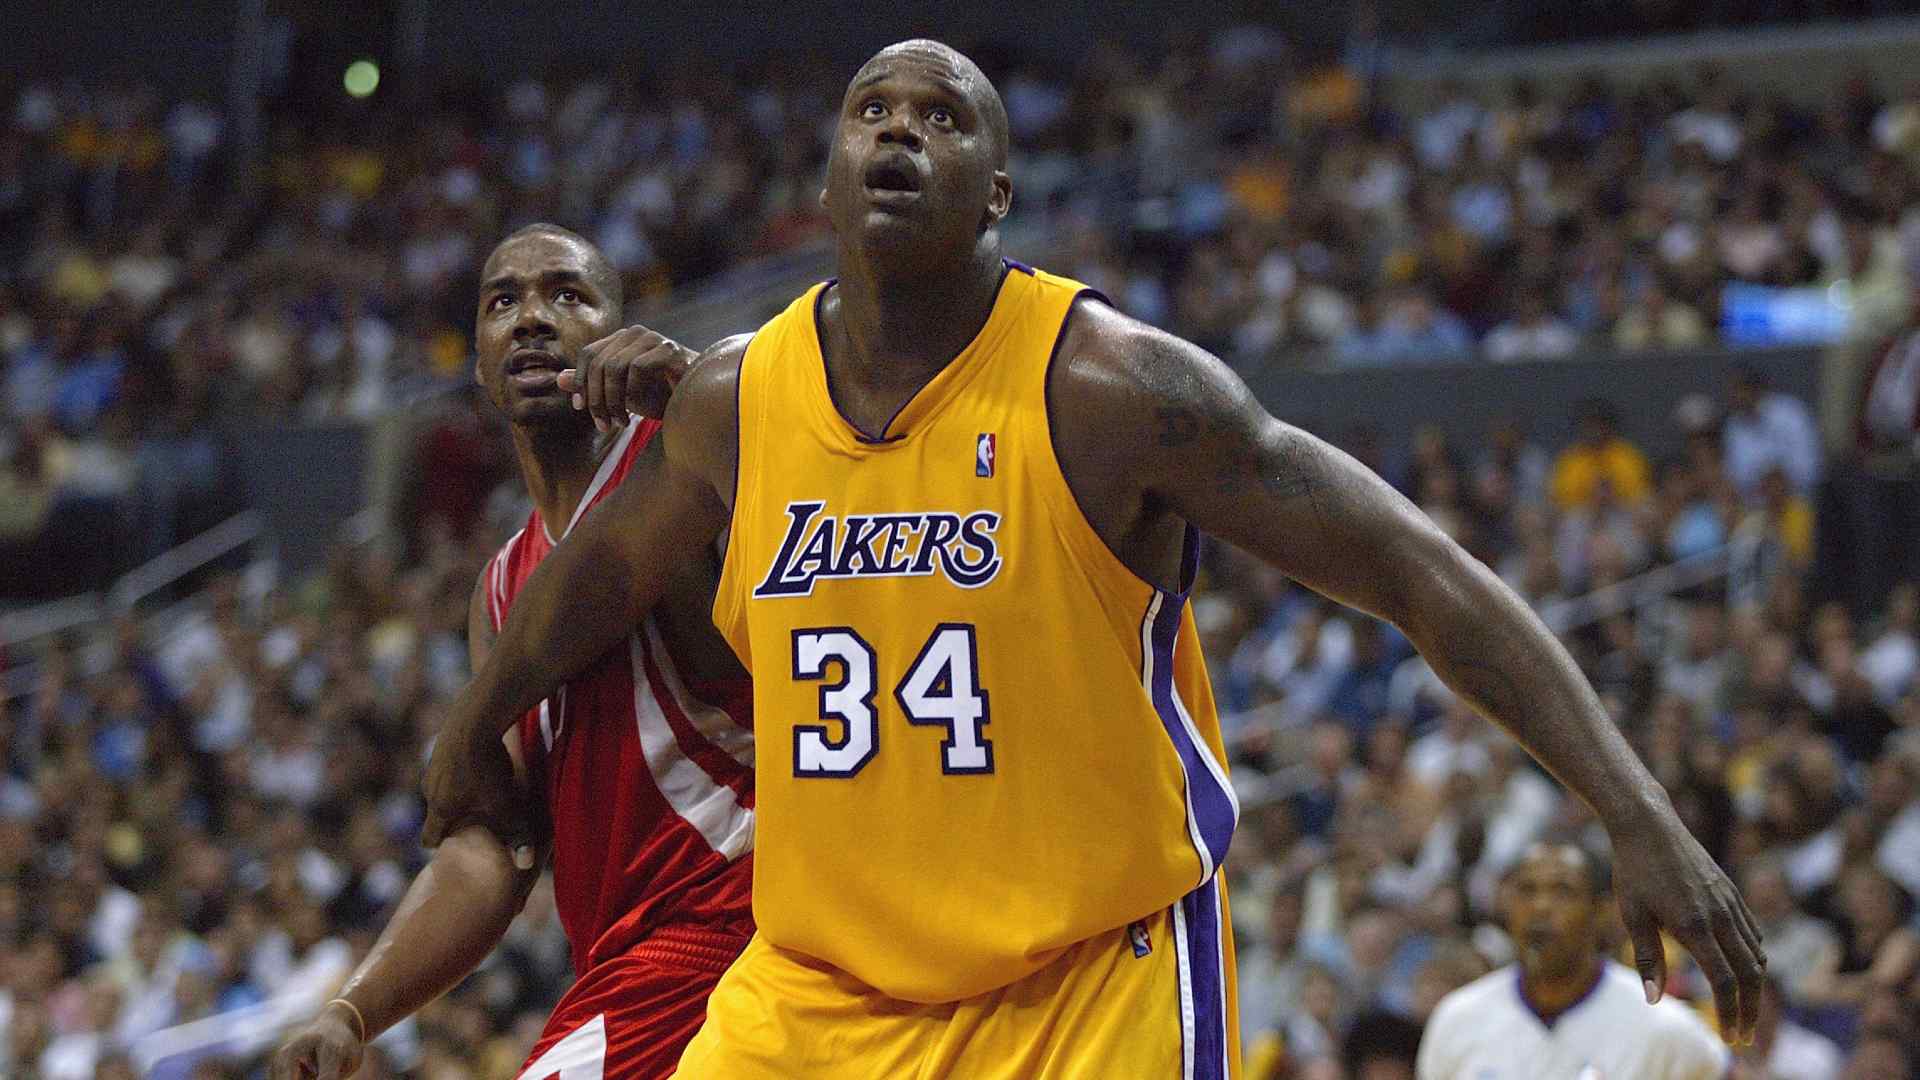 Shaquille O'Neal has 2508 rebounds in the playoffs. (Image credits: twitter)